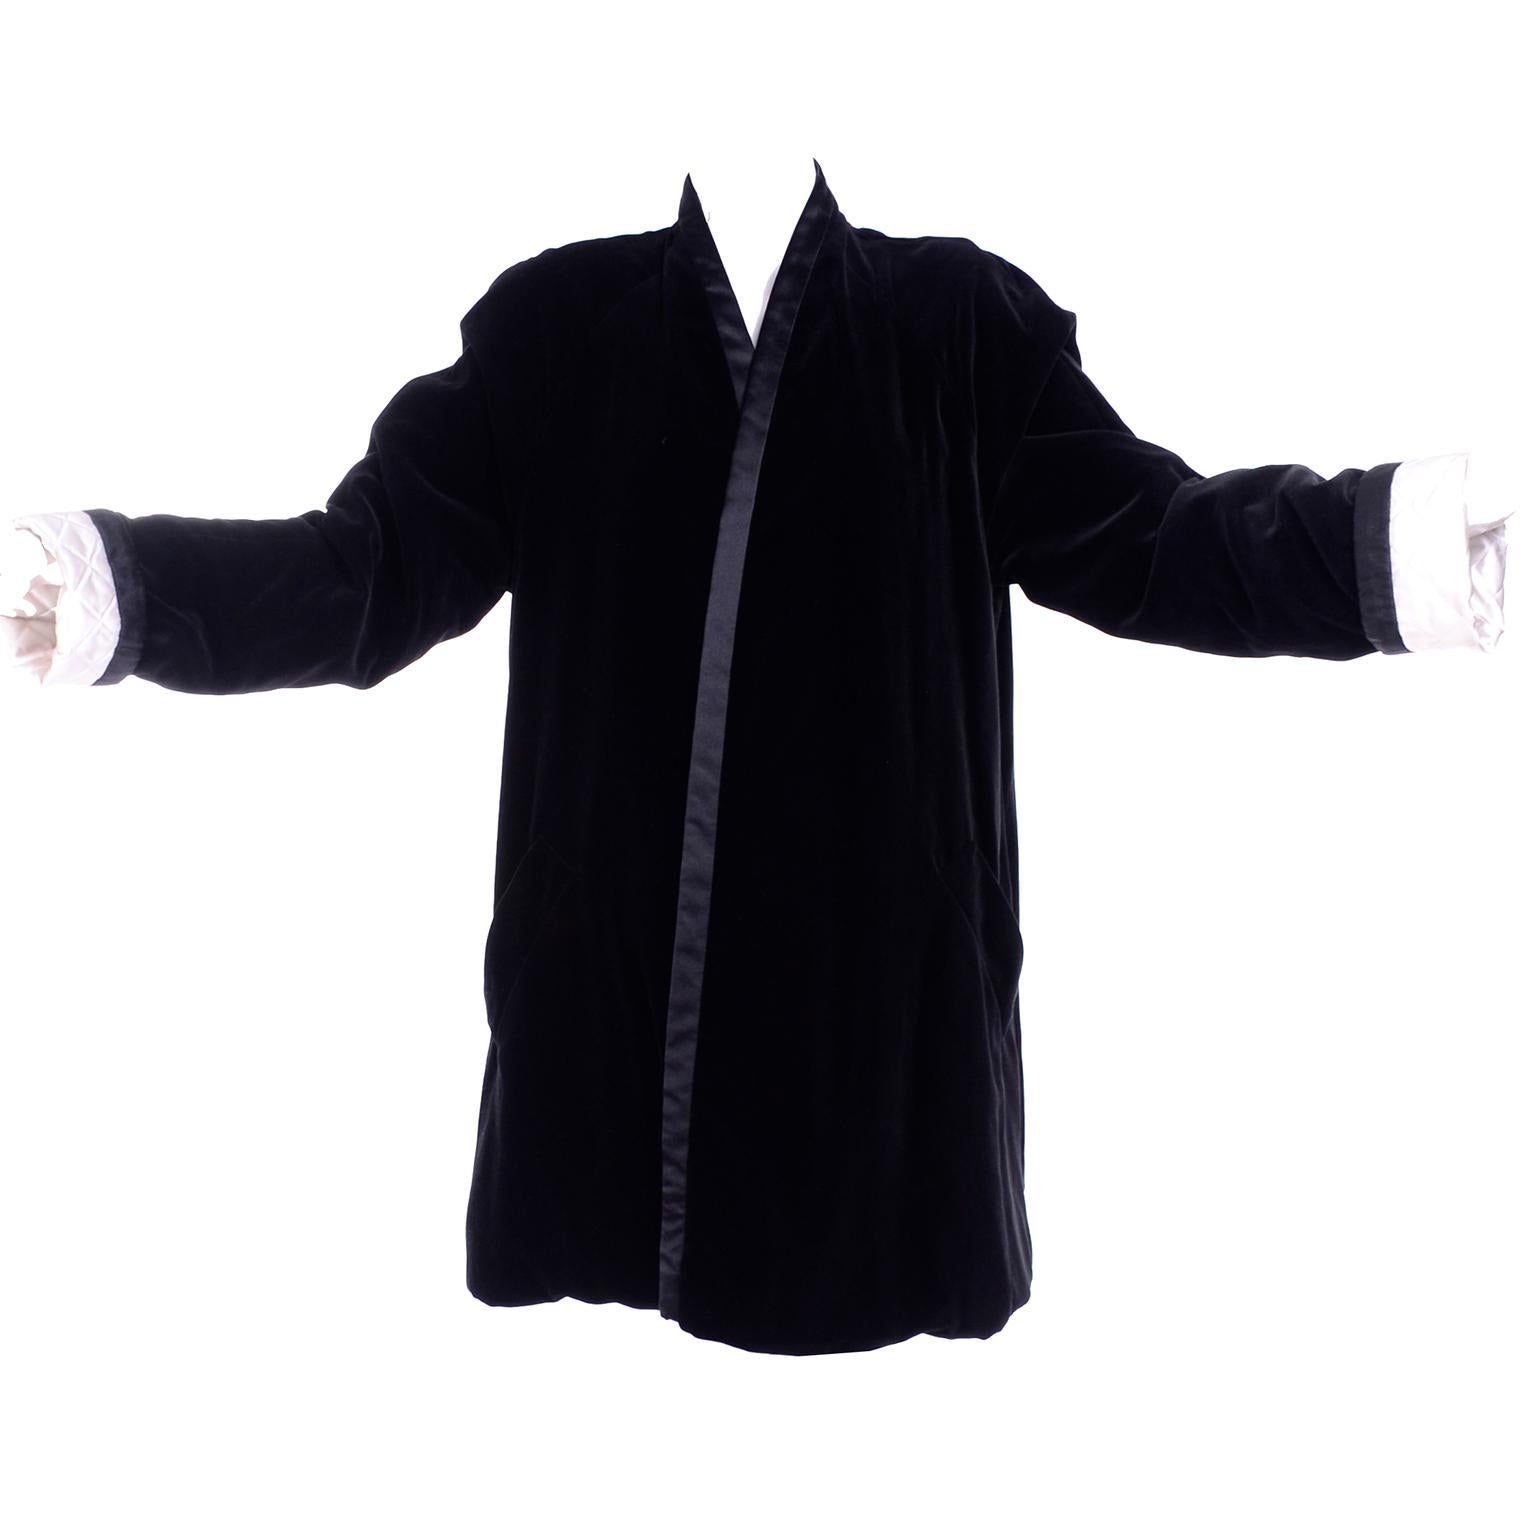 This is a beautiful Escada couture vintage evening coat in black velvet. We always search for good evening wrap and coat options because they are so important to complete the look for special occasions! This vintage Escada black velvet evening coat